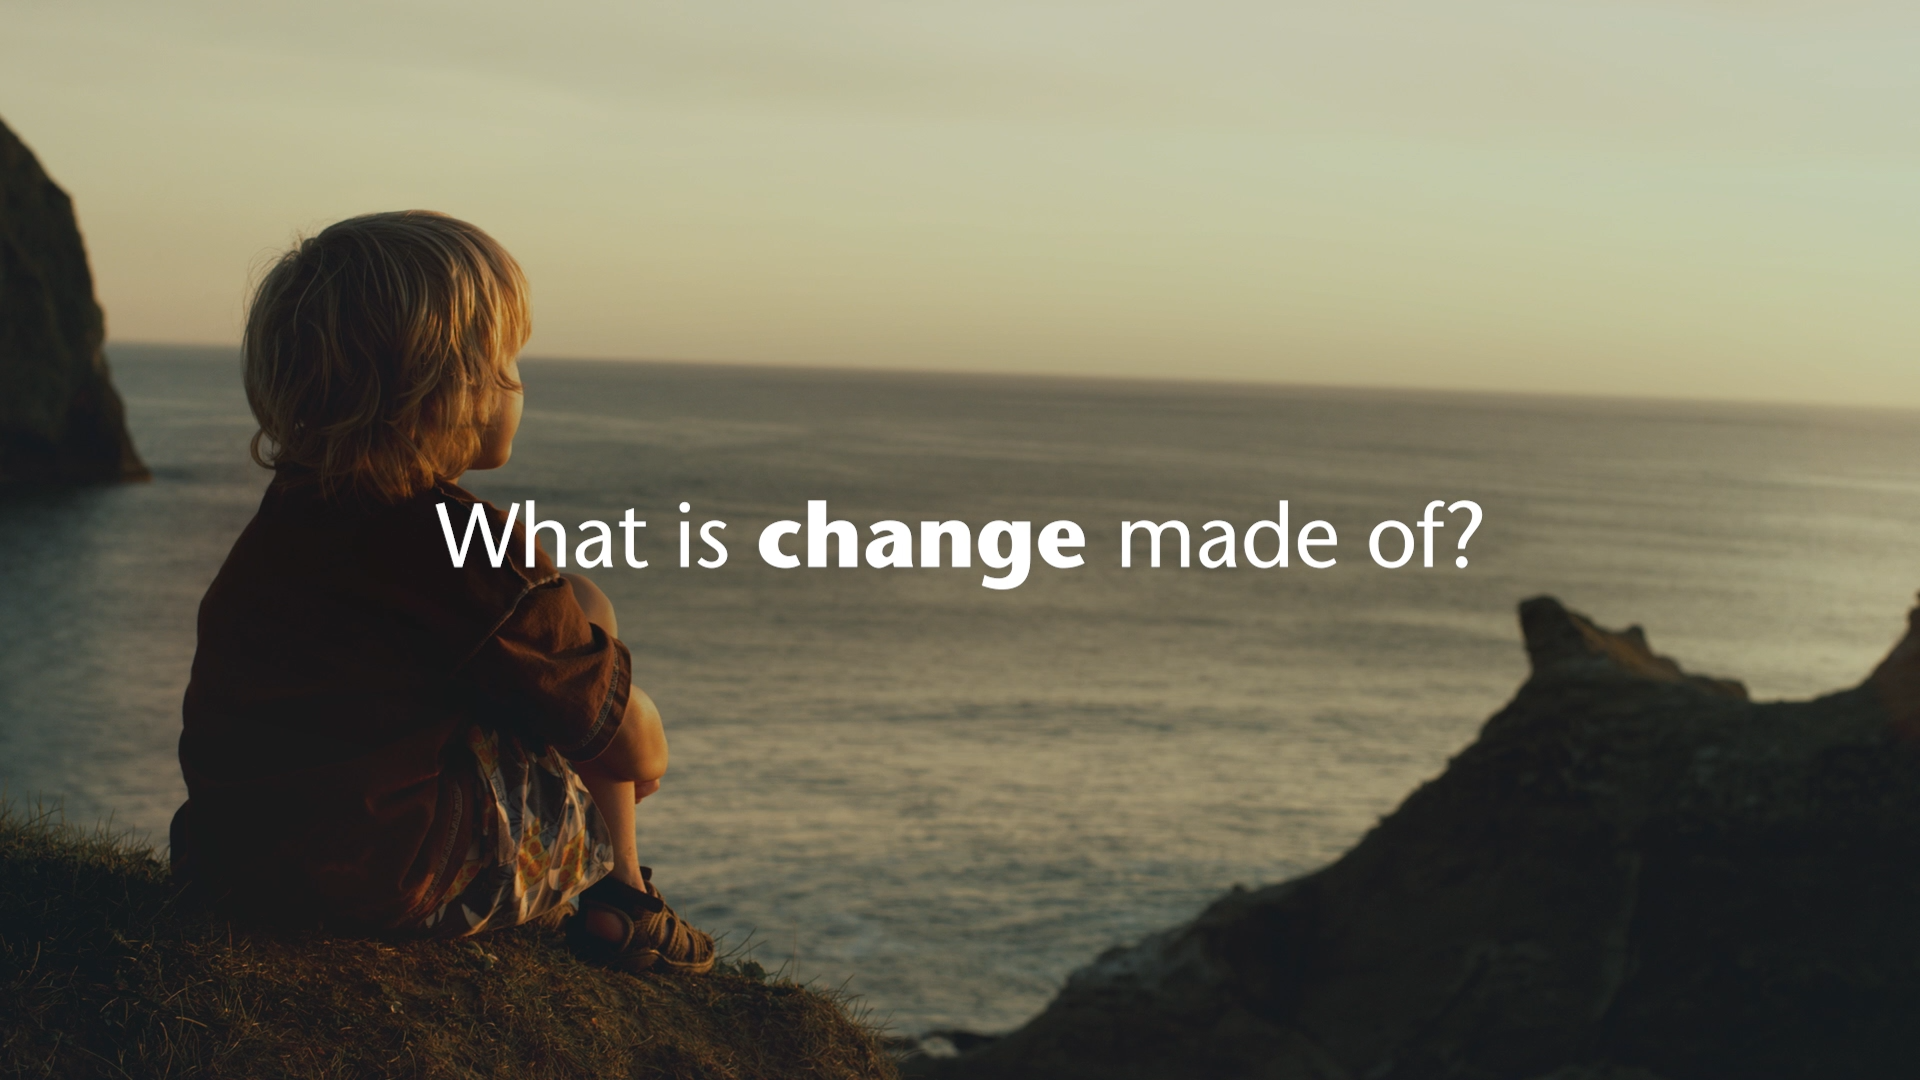 Click to find out what change is made of at SCHOTT.